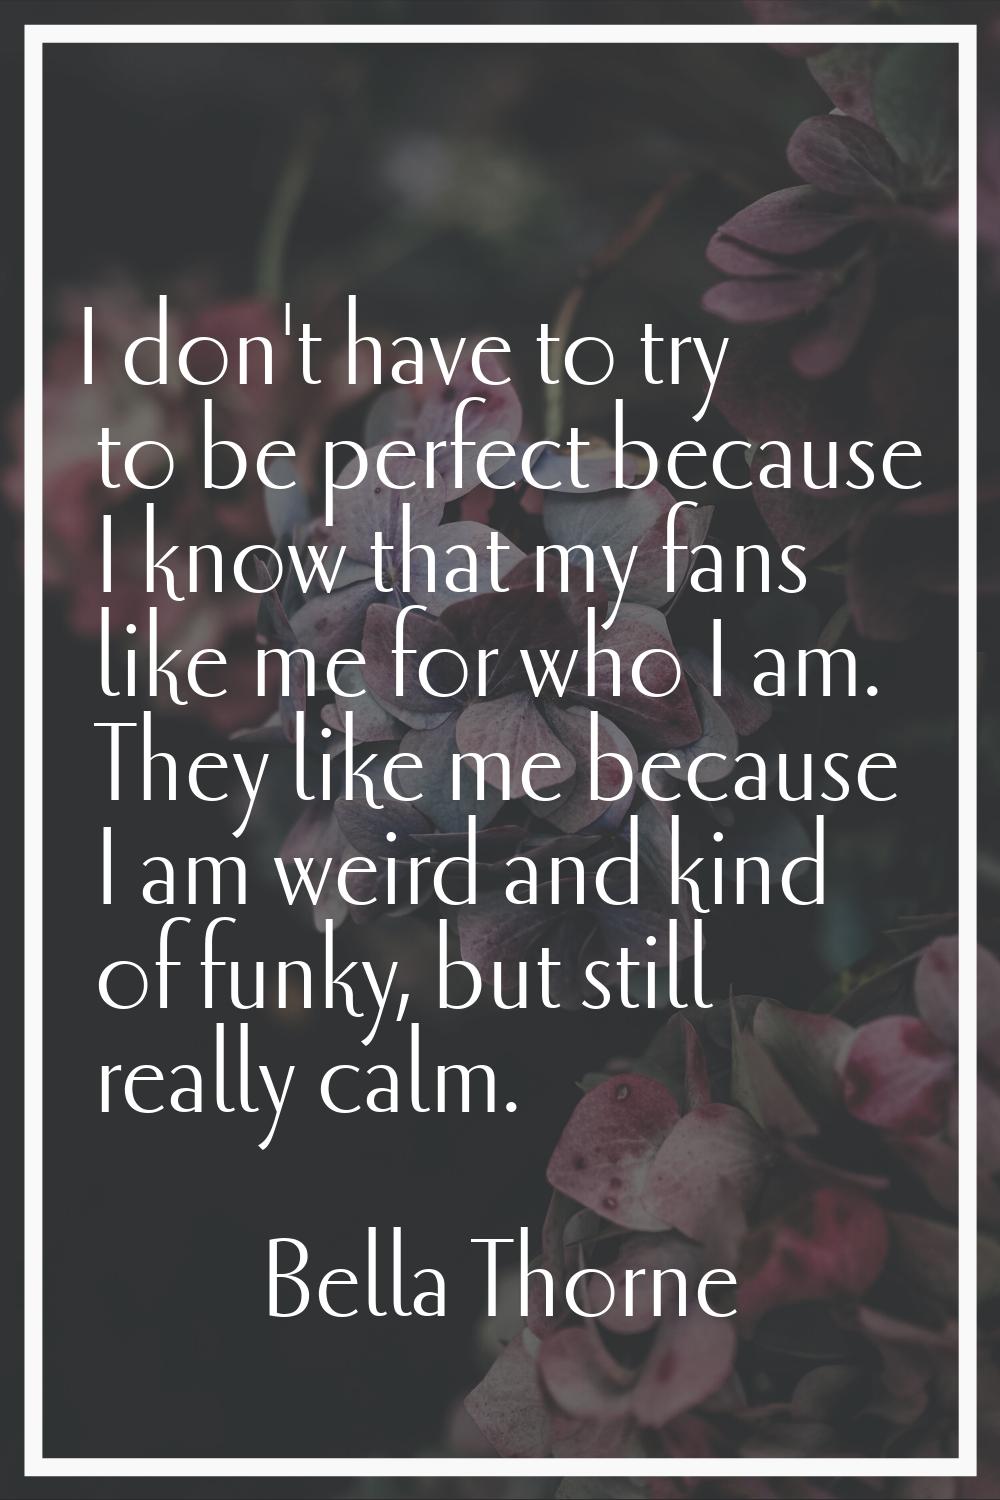 I don't have to try to be perfect because I know that my fans like me for who I am. They like me be